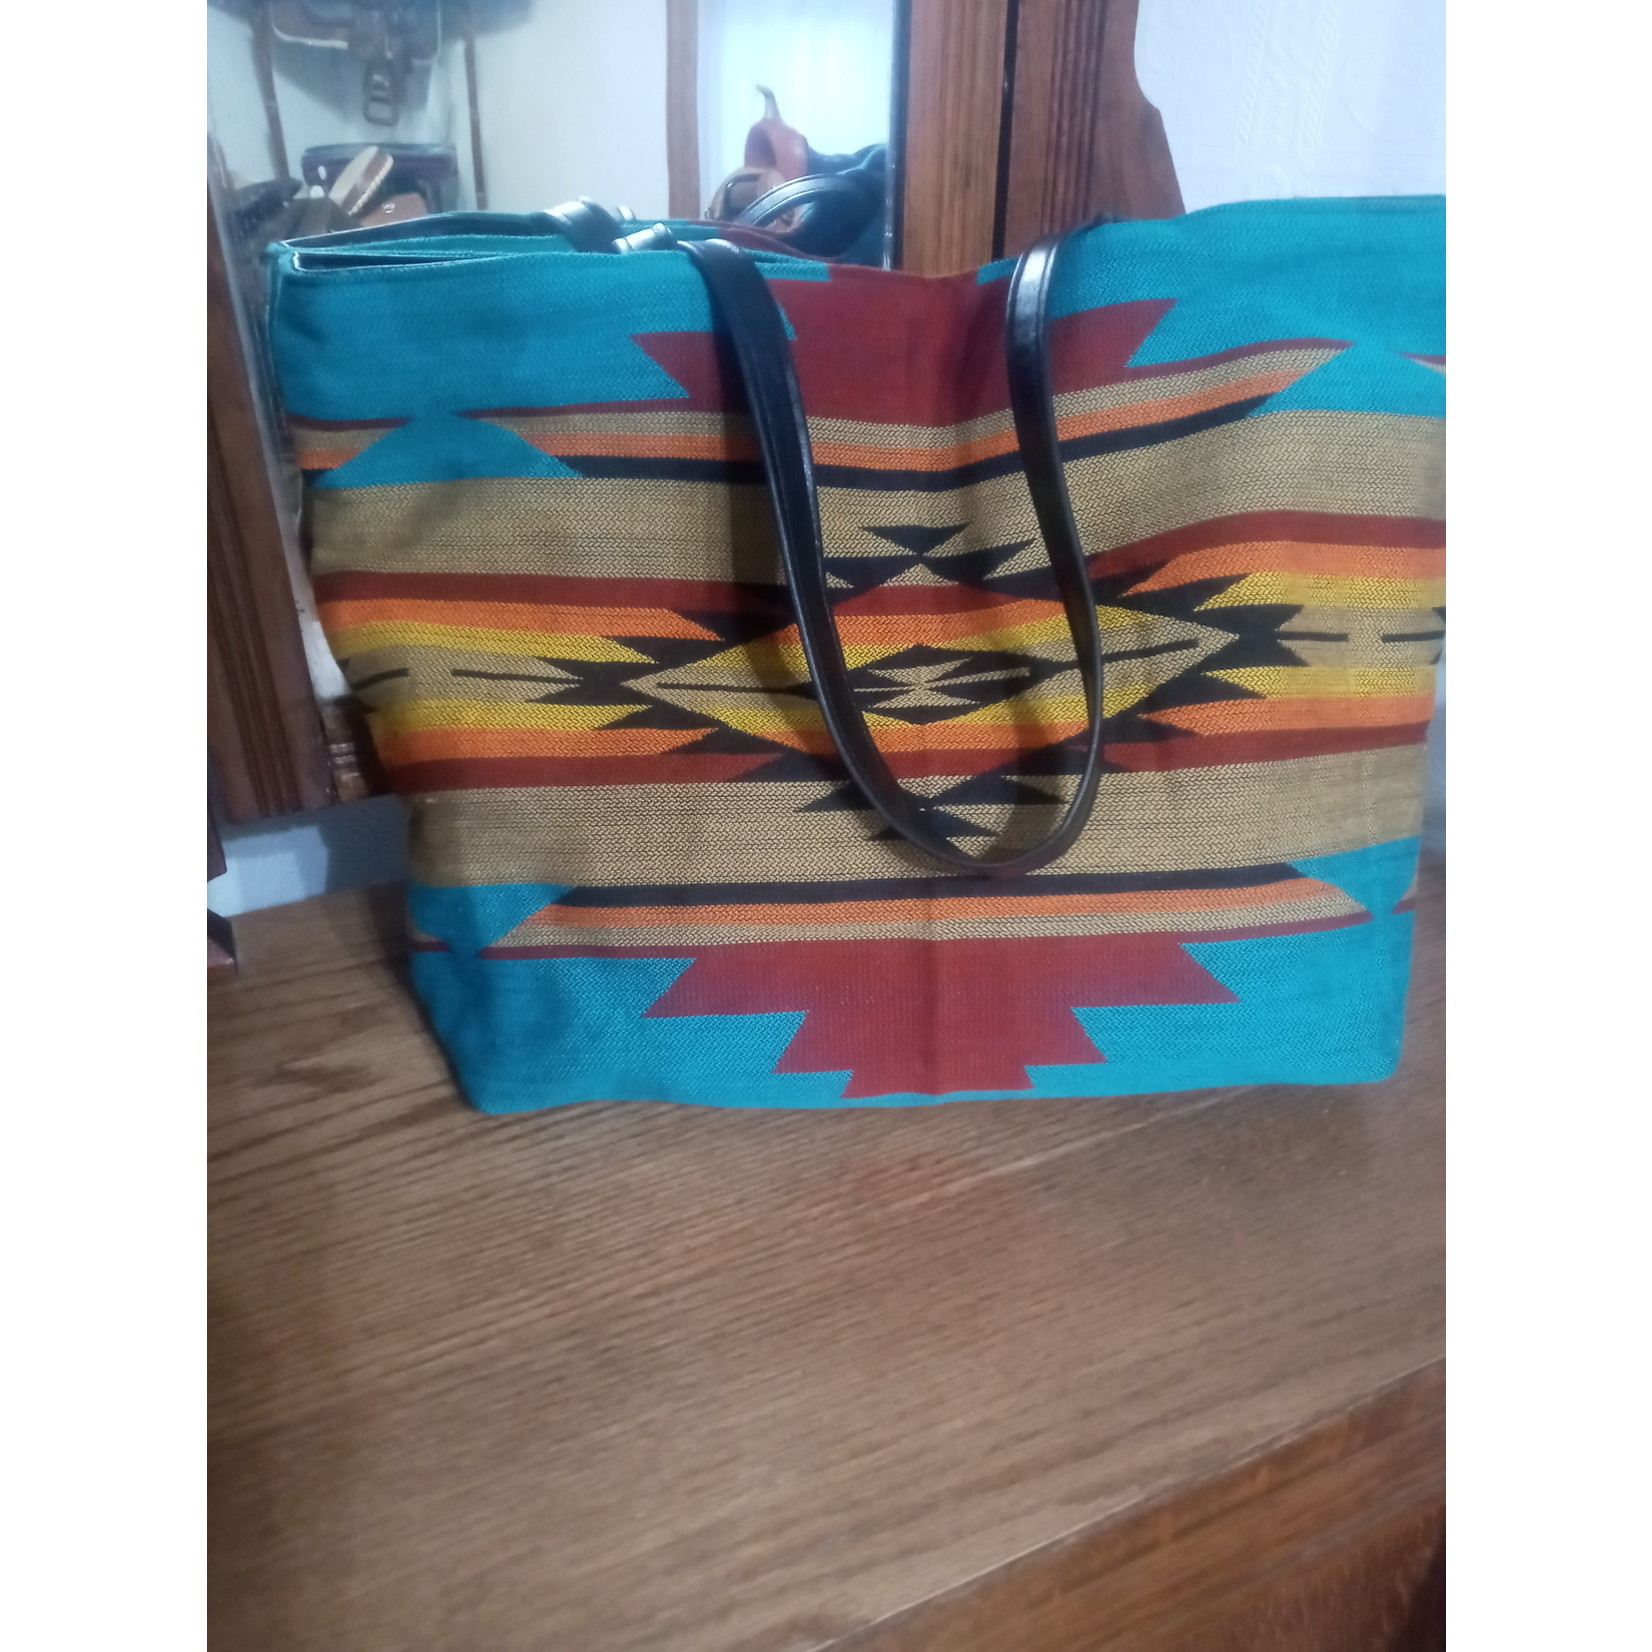 The Crooked Creek  Studio Woven Southwest  Style Lined Totes/Bag